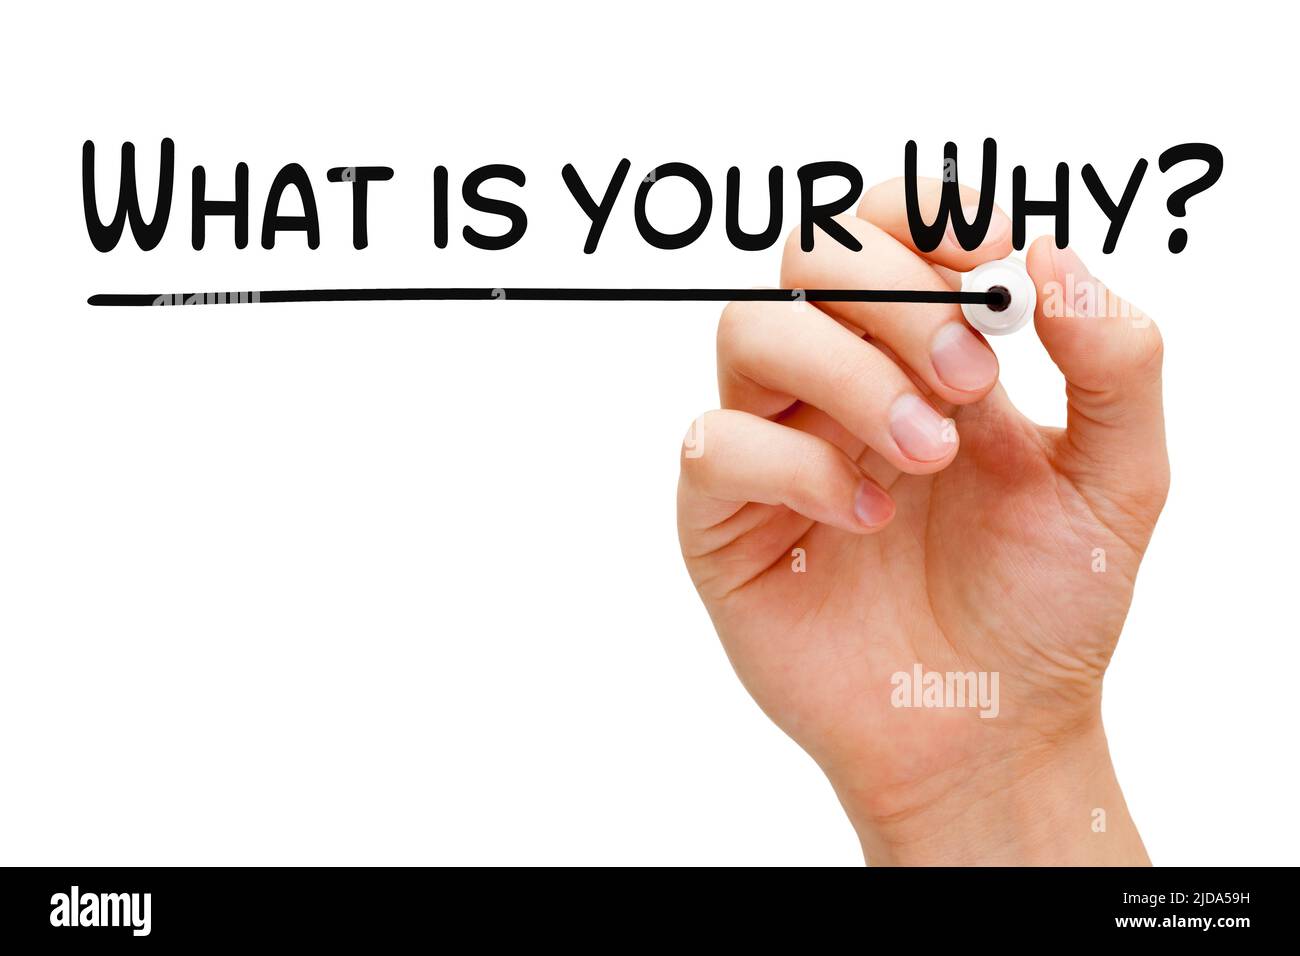 Hand writing existential question What Is Your Why with black marker. Purpose concept. Stock Photo